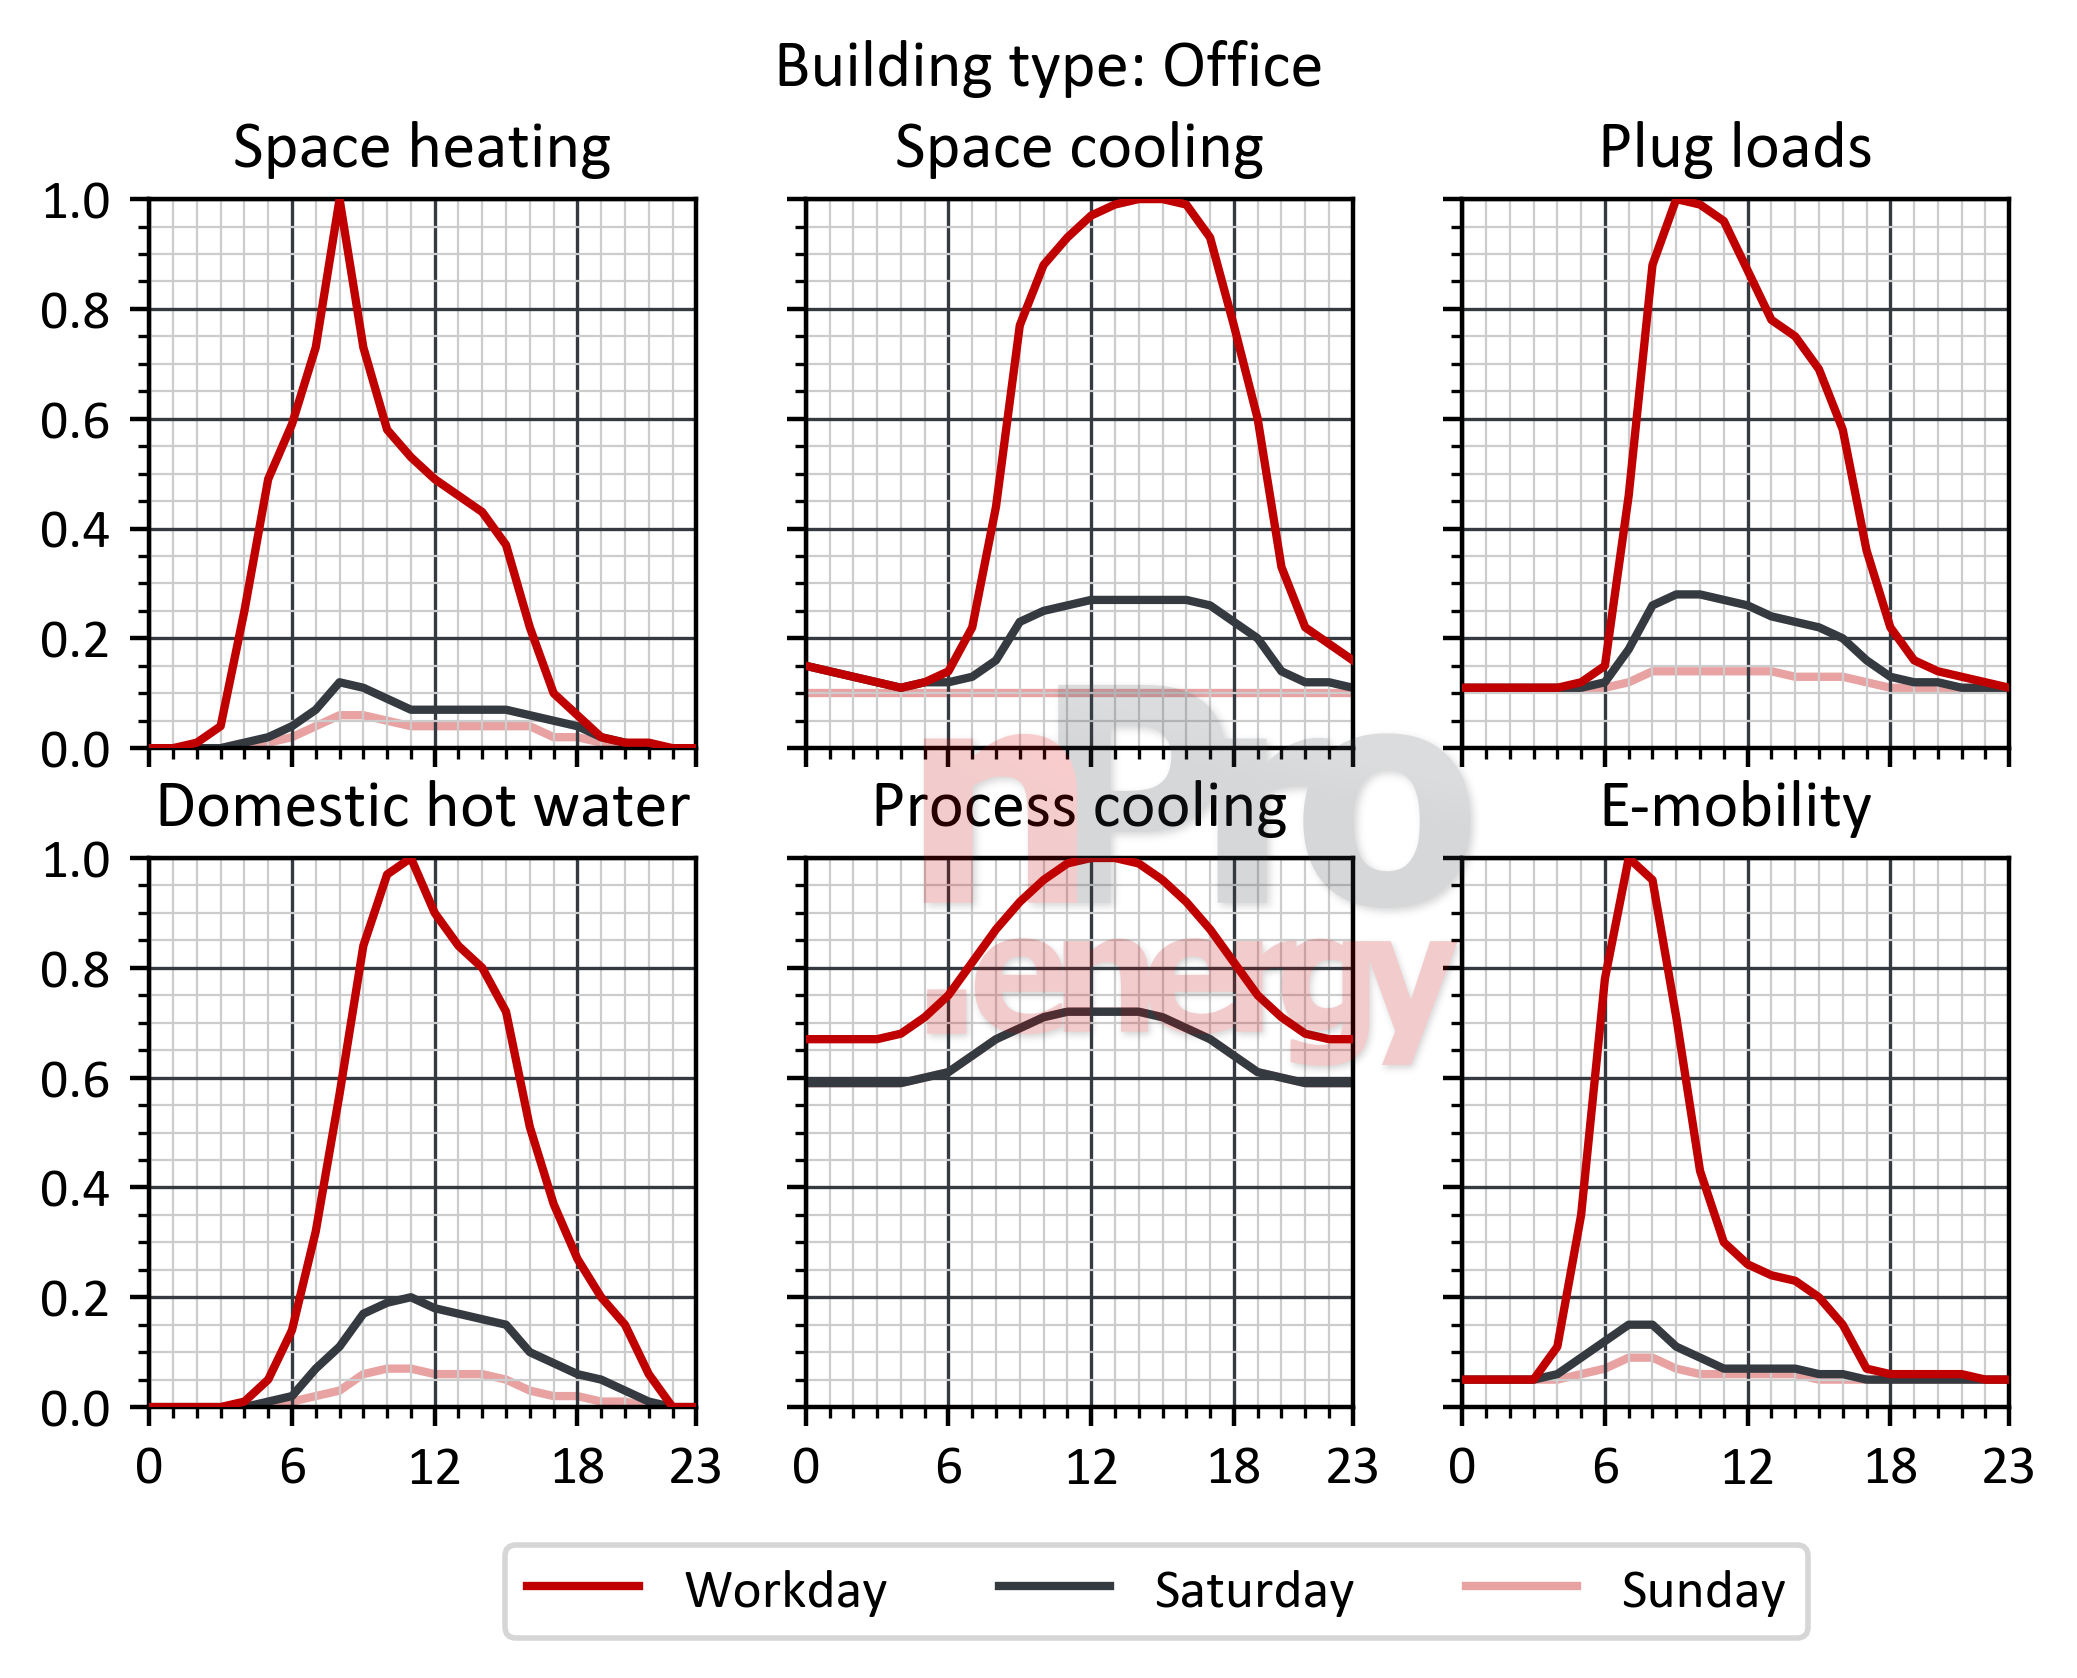 offices laod profiles